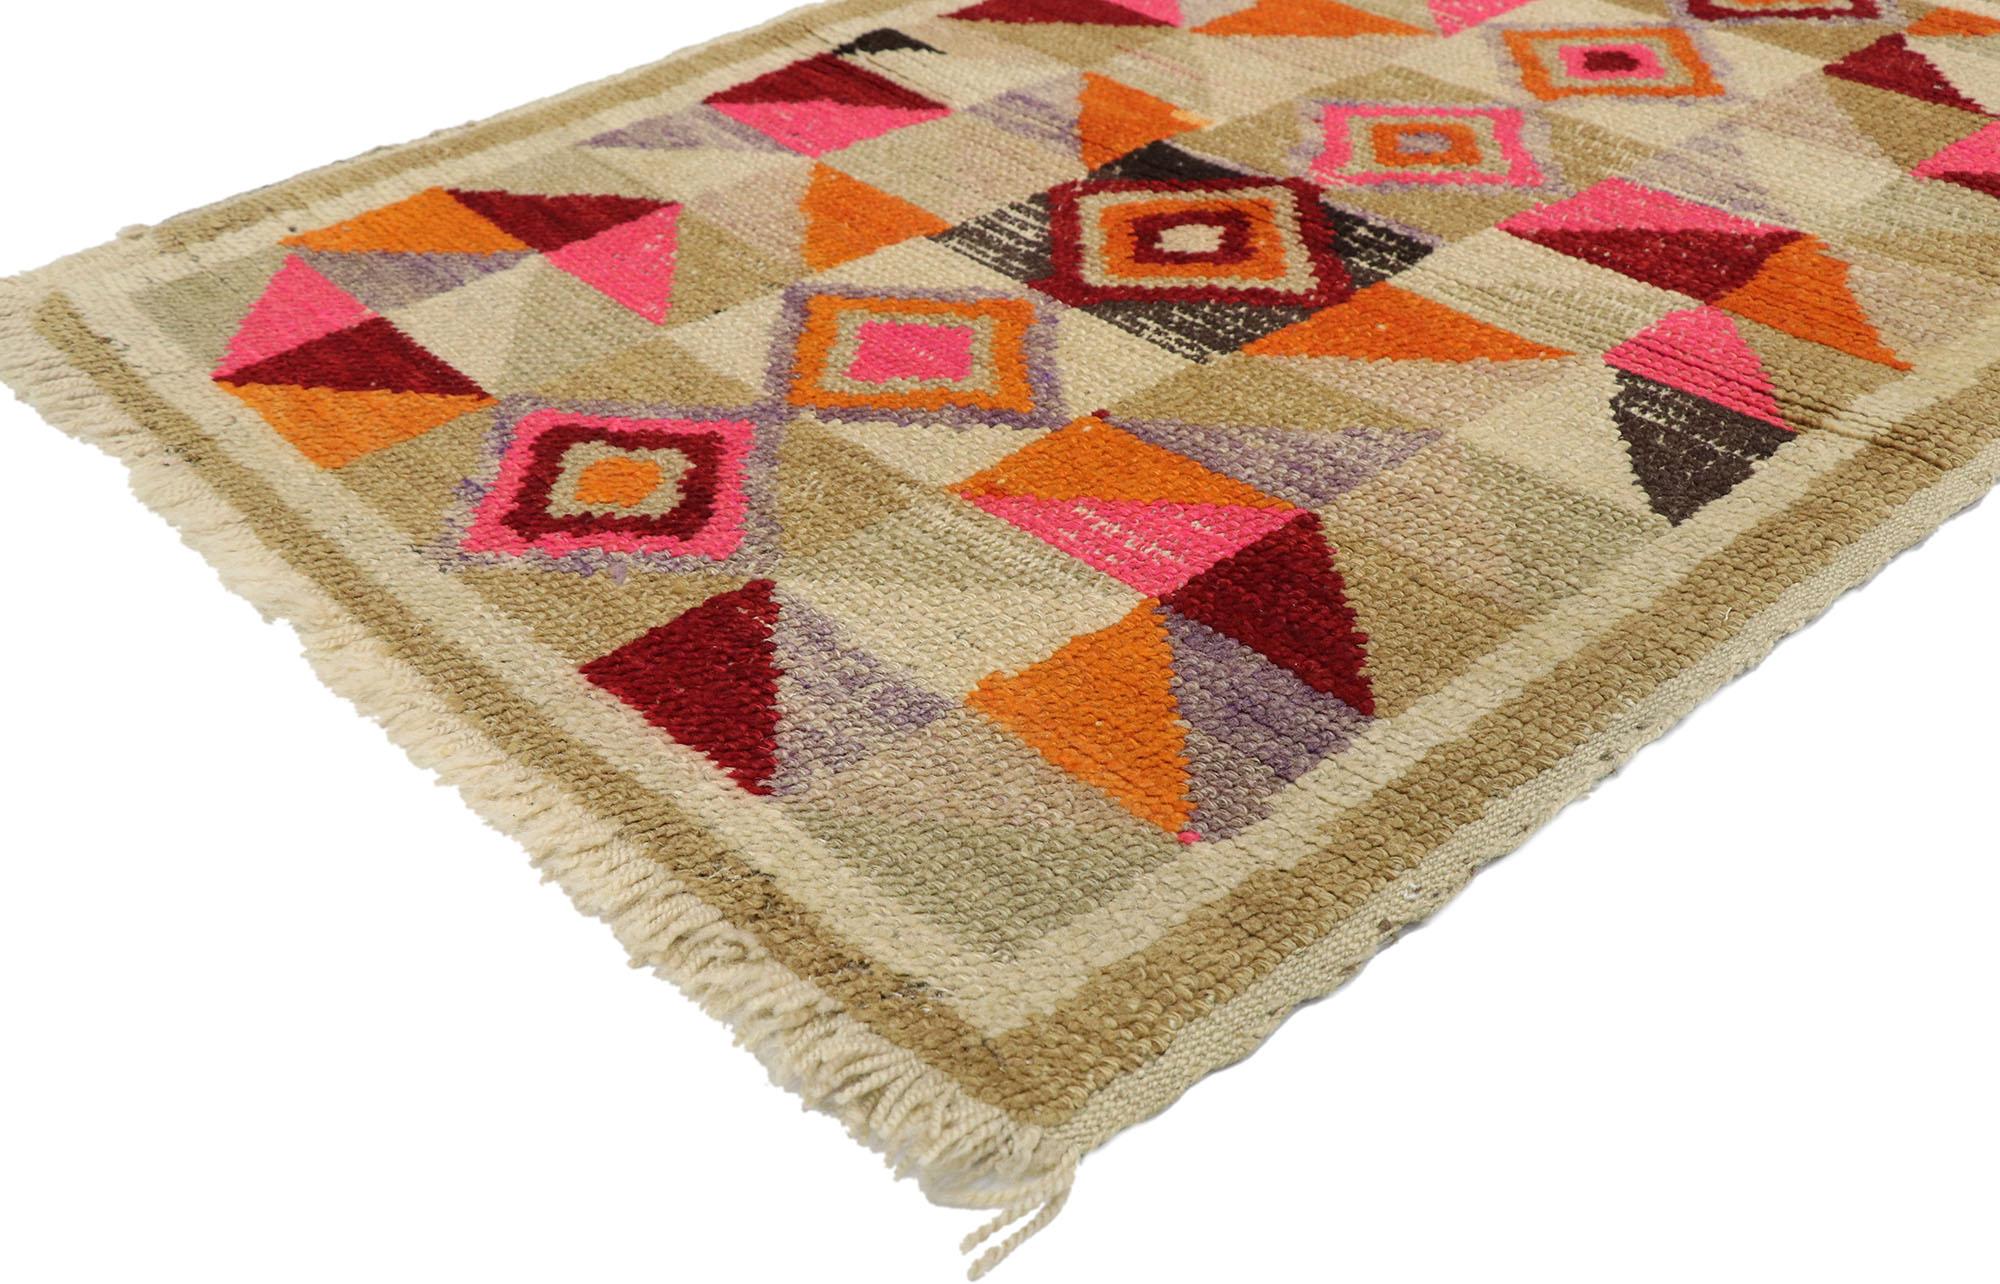 78050 Vintage Turkish Rug, 03'02 x 04'01. 
Cubism collides with Postmodern style in this hand knotted wool vintage Turkish rug. The cubist design and vibrant colors woven into this piece work together creating a truly unique look. The abrashed field